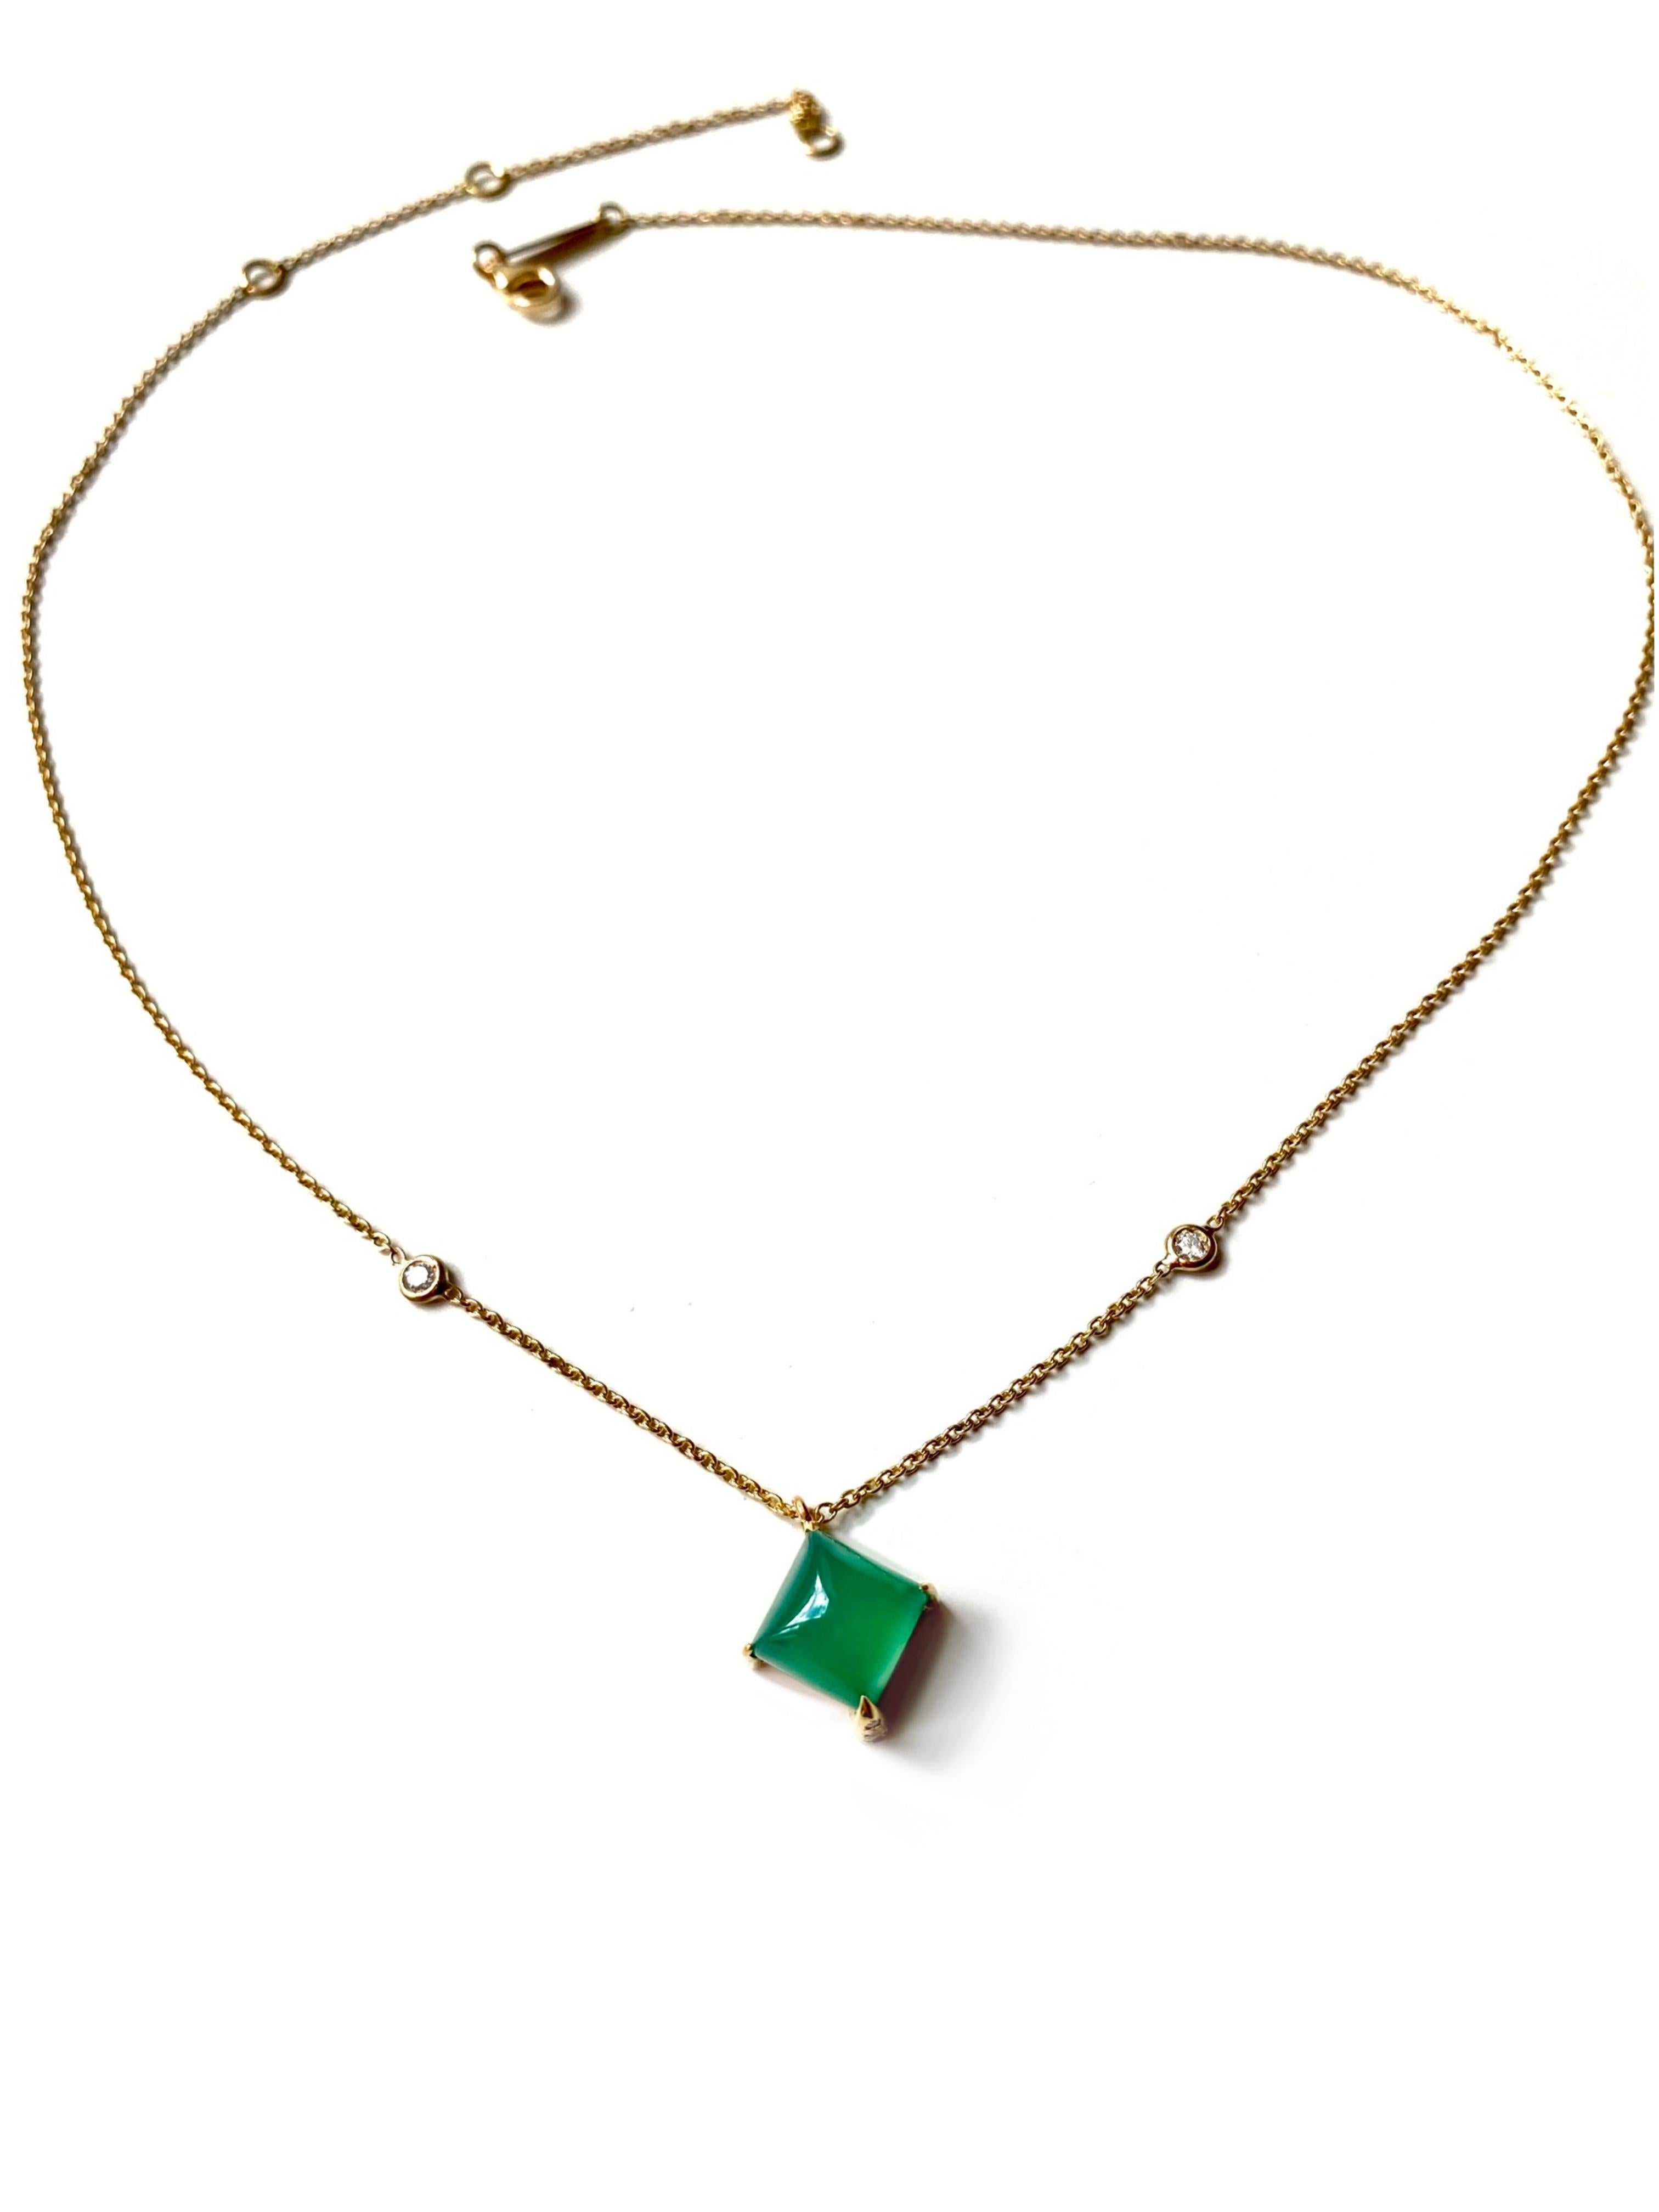 white gold necklace with green stone